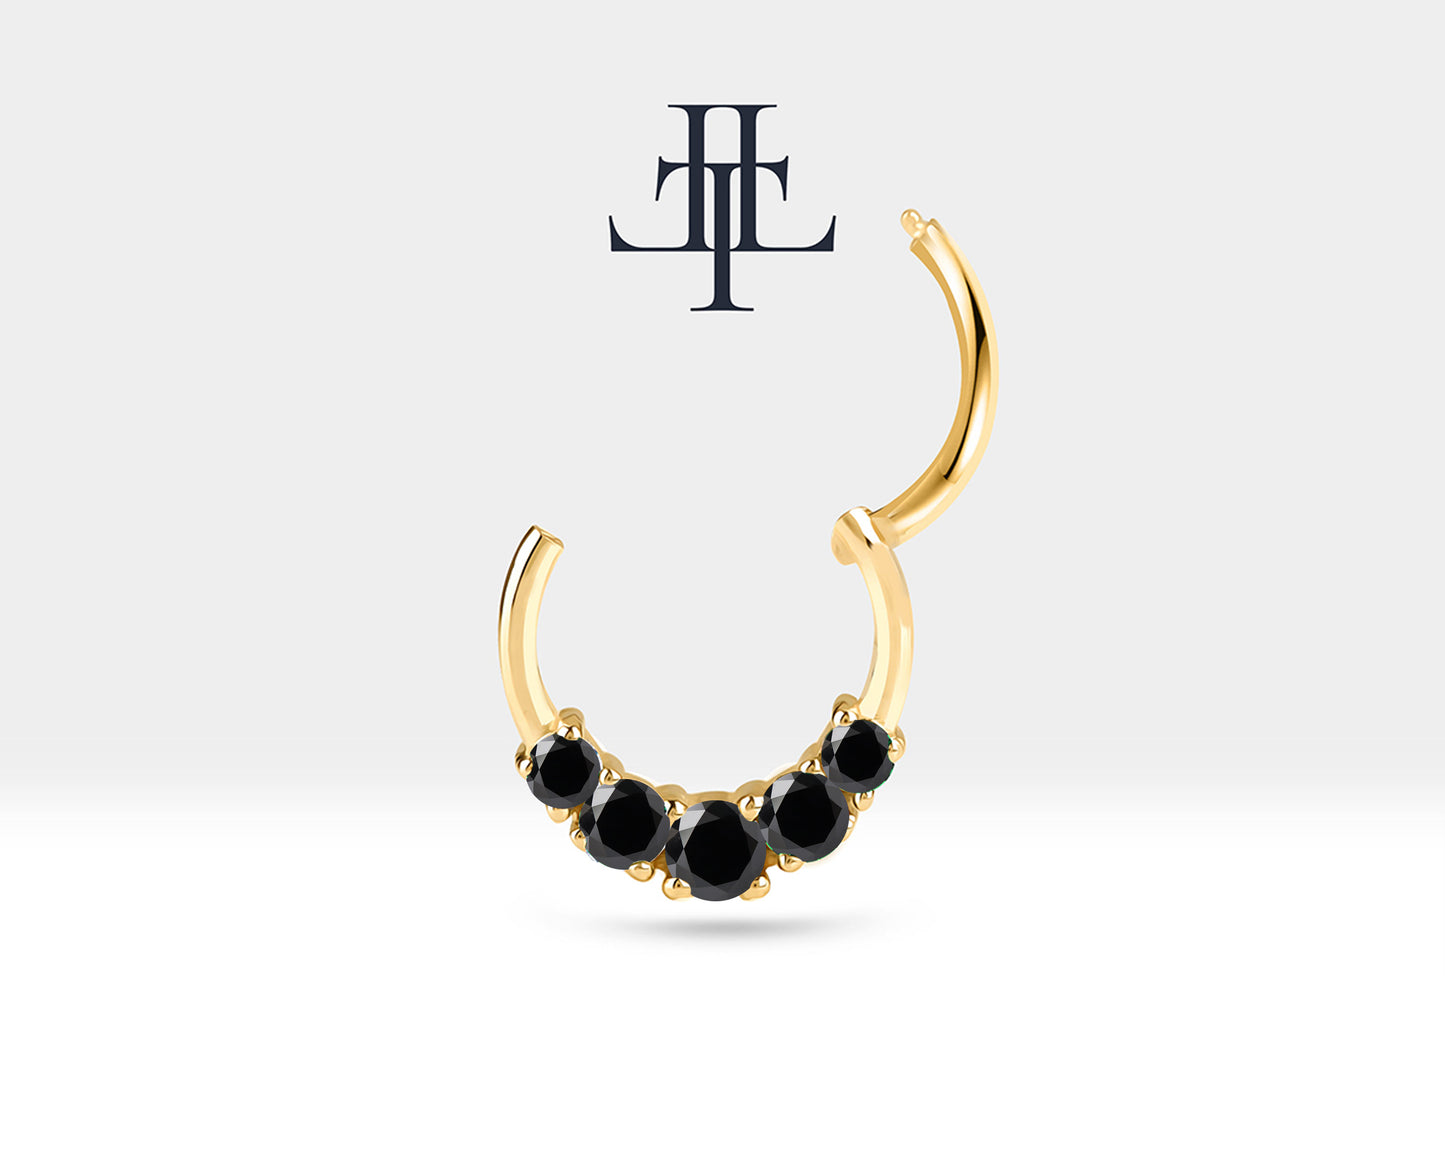 Cartilage Hoop with Five Round Cut Black Diamond Clicker Minimalist Hoops in 14K White-Yellow-Rose Solid Gold,16G